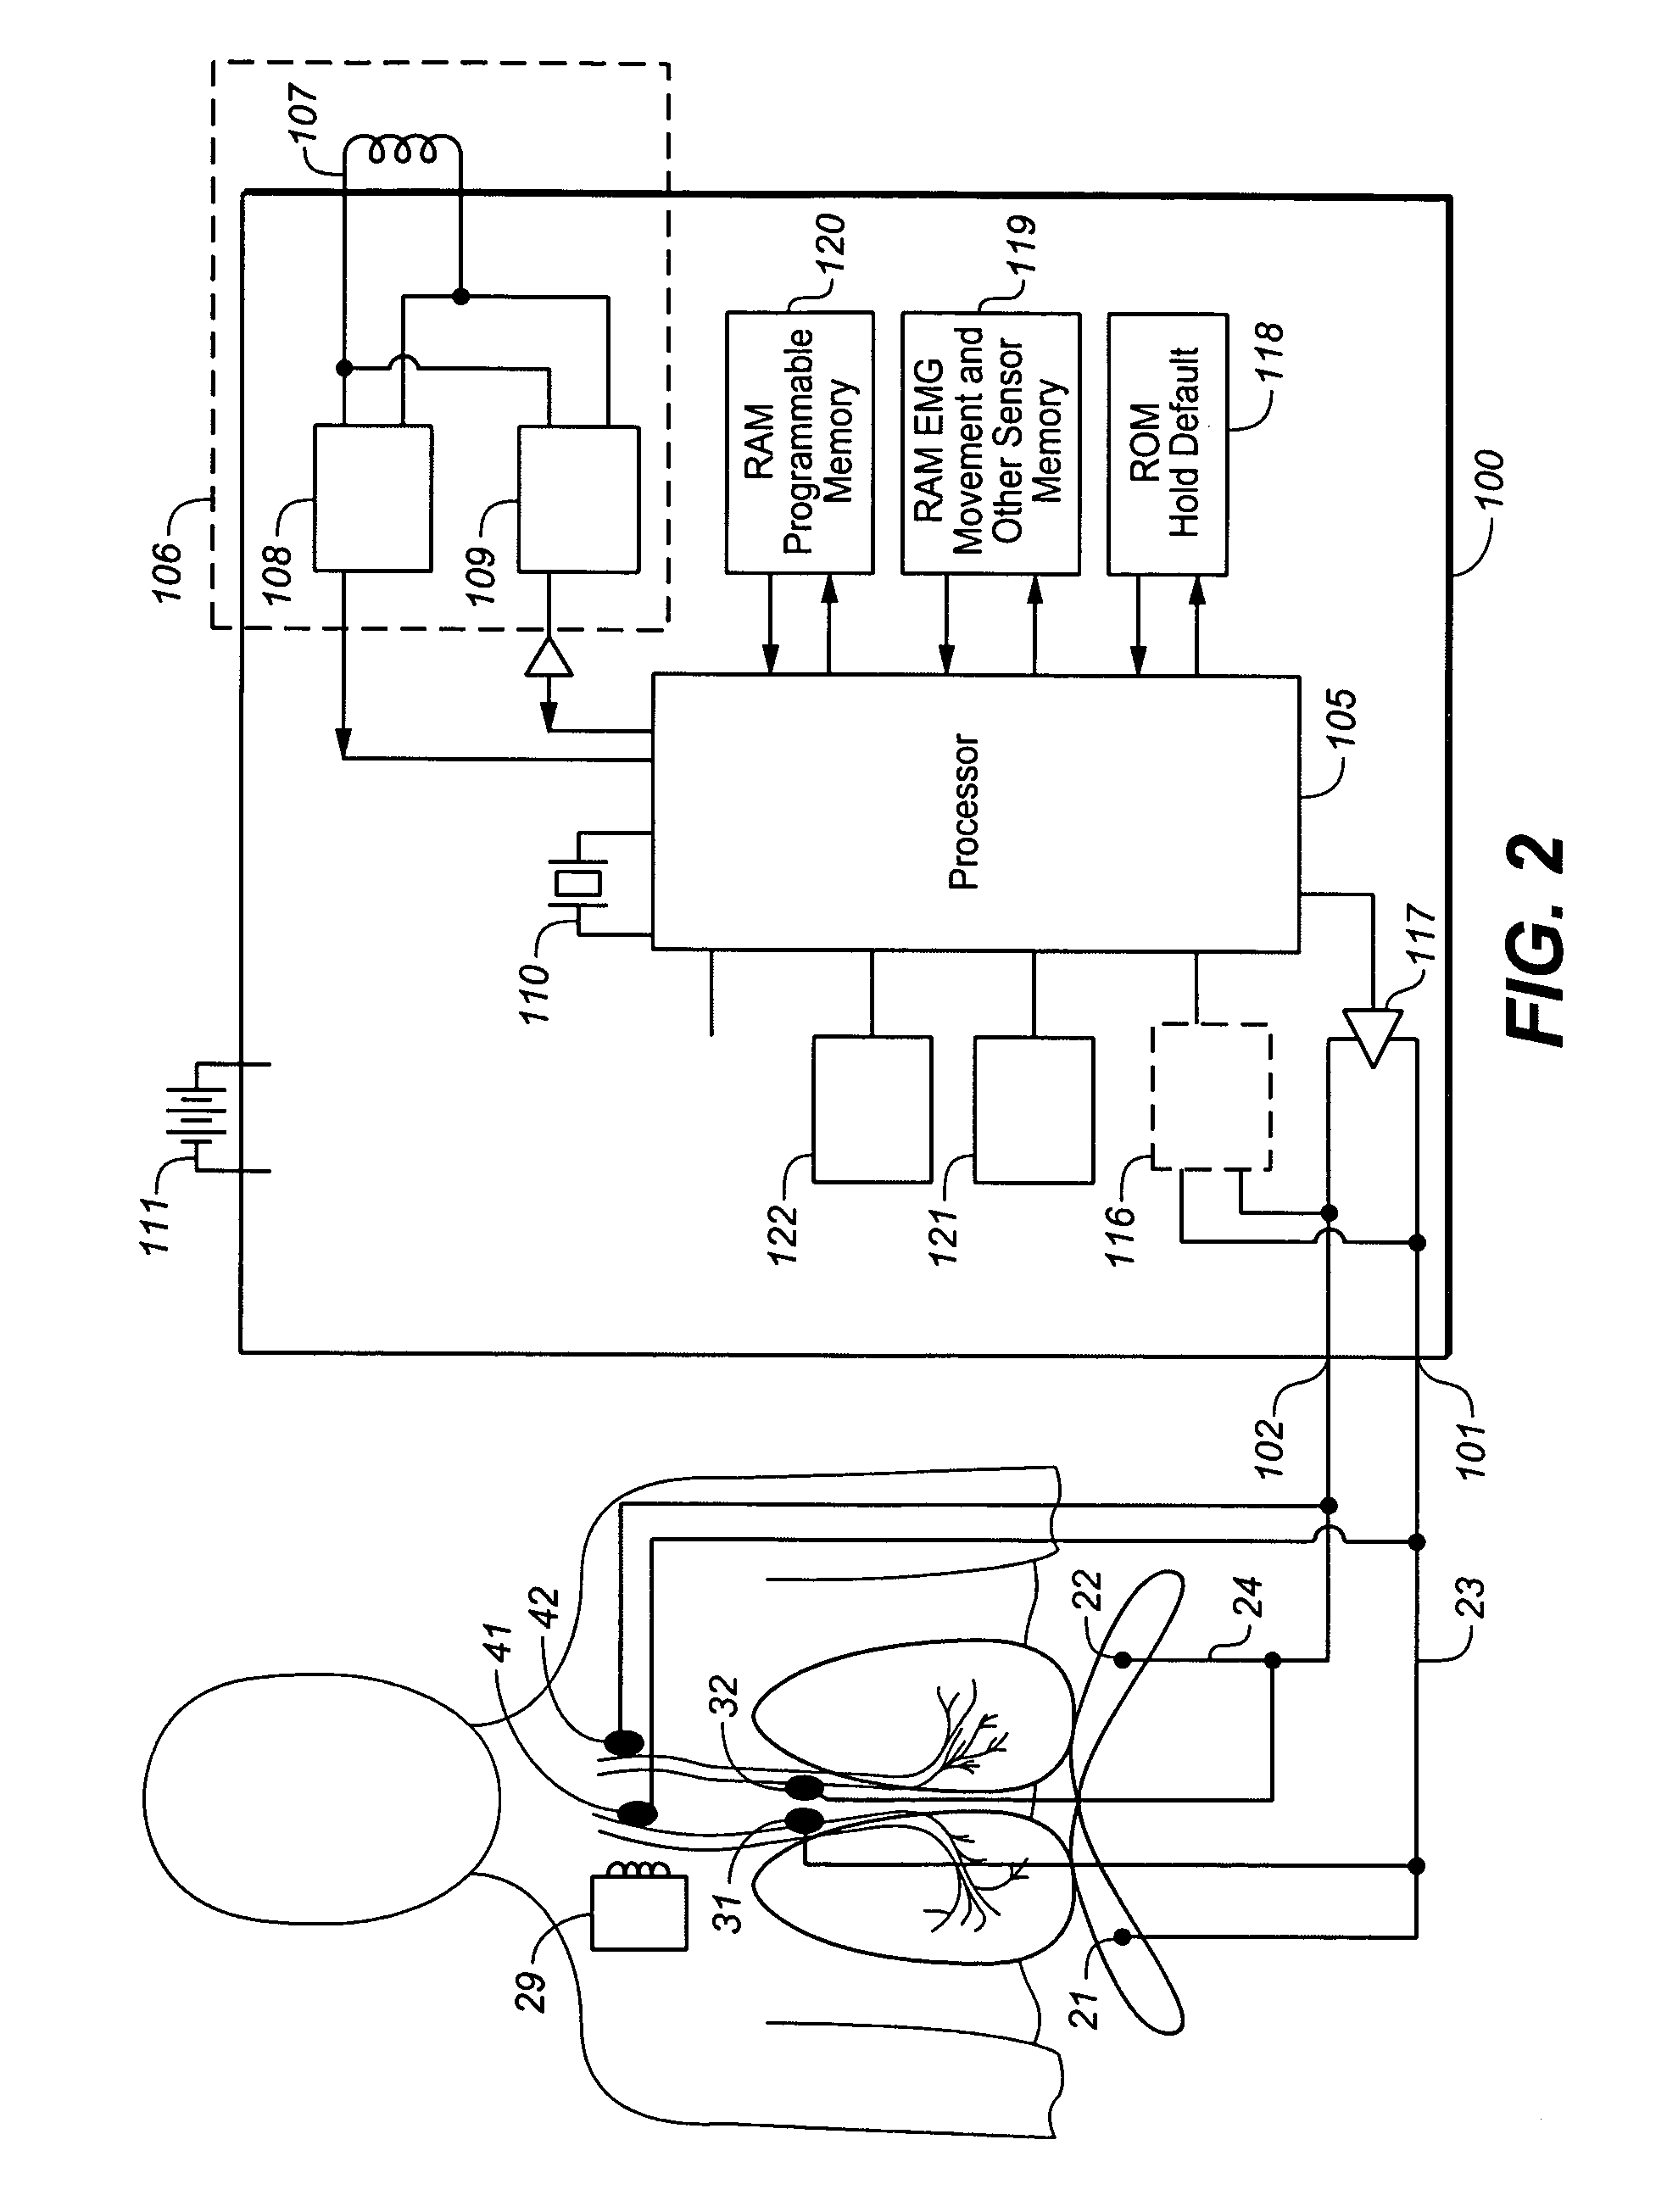 Device and method for increasing functional residual capacity